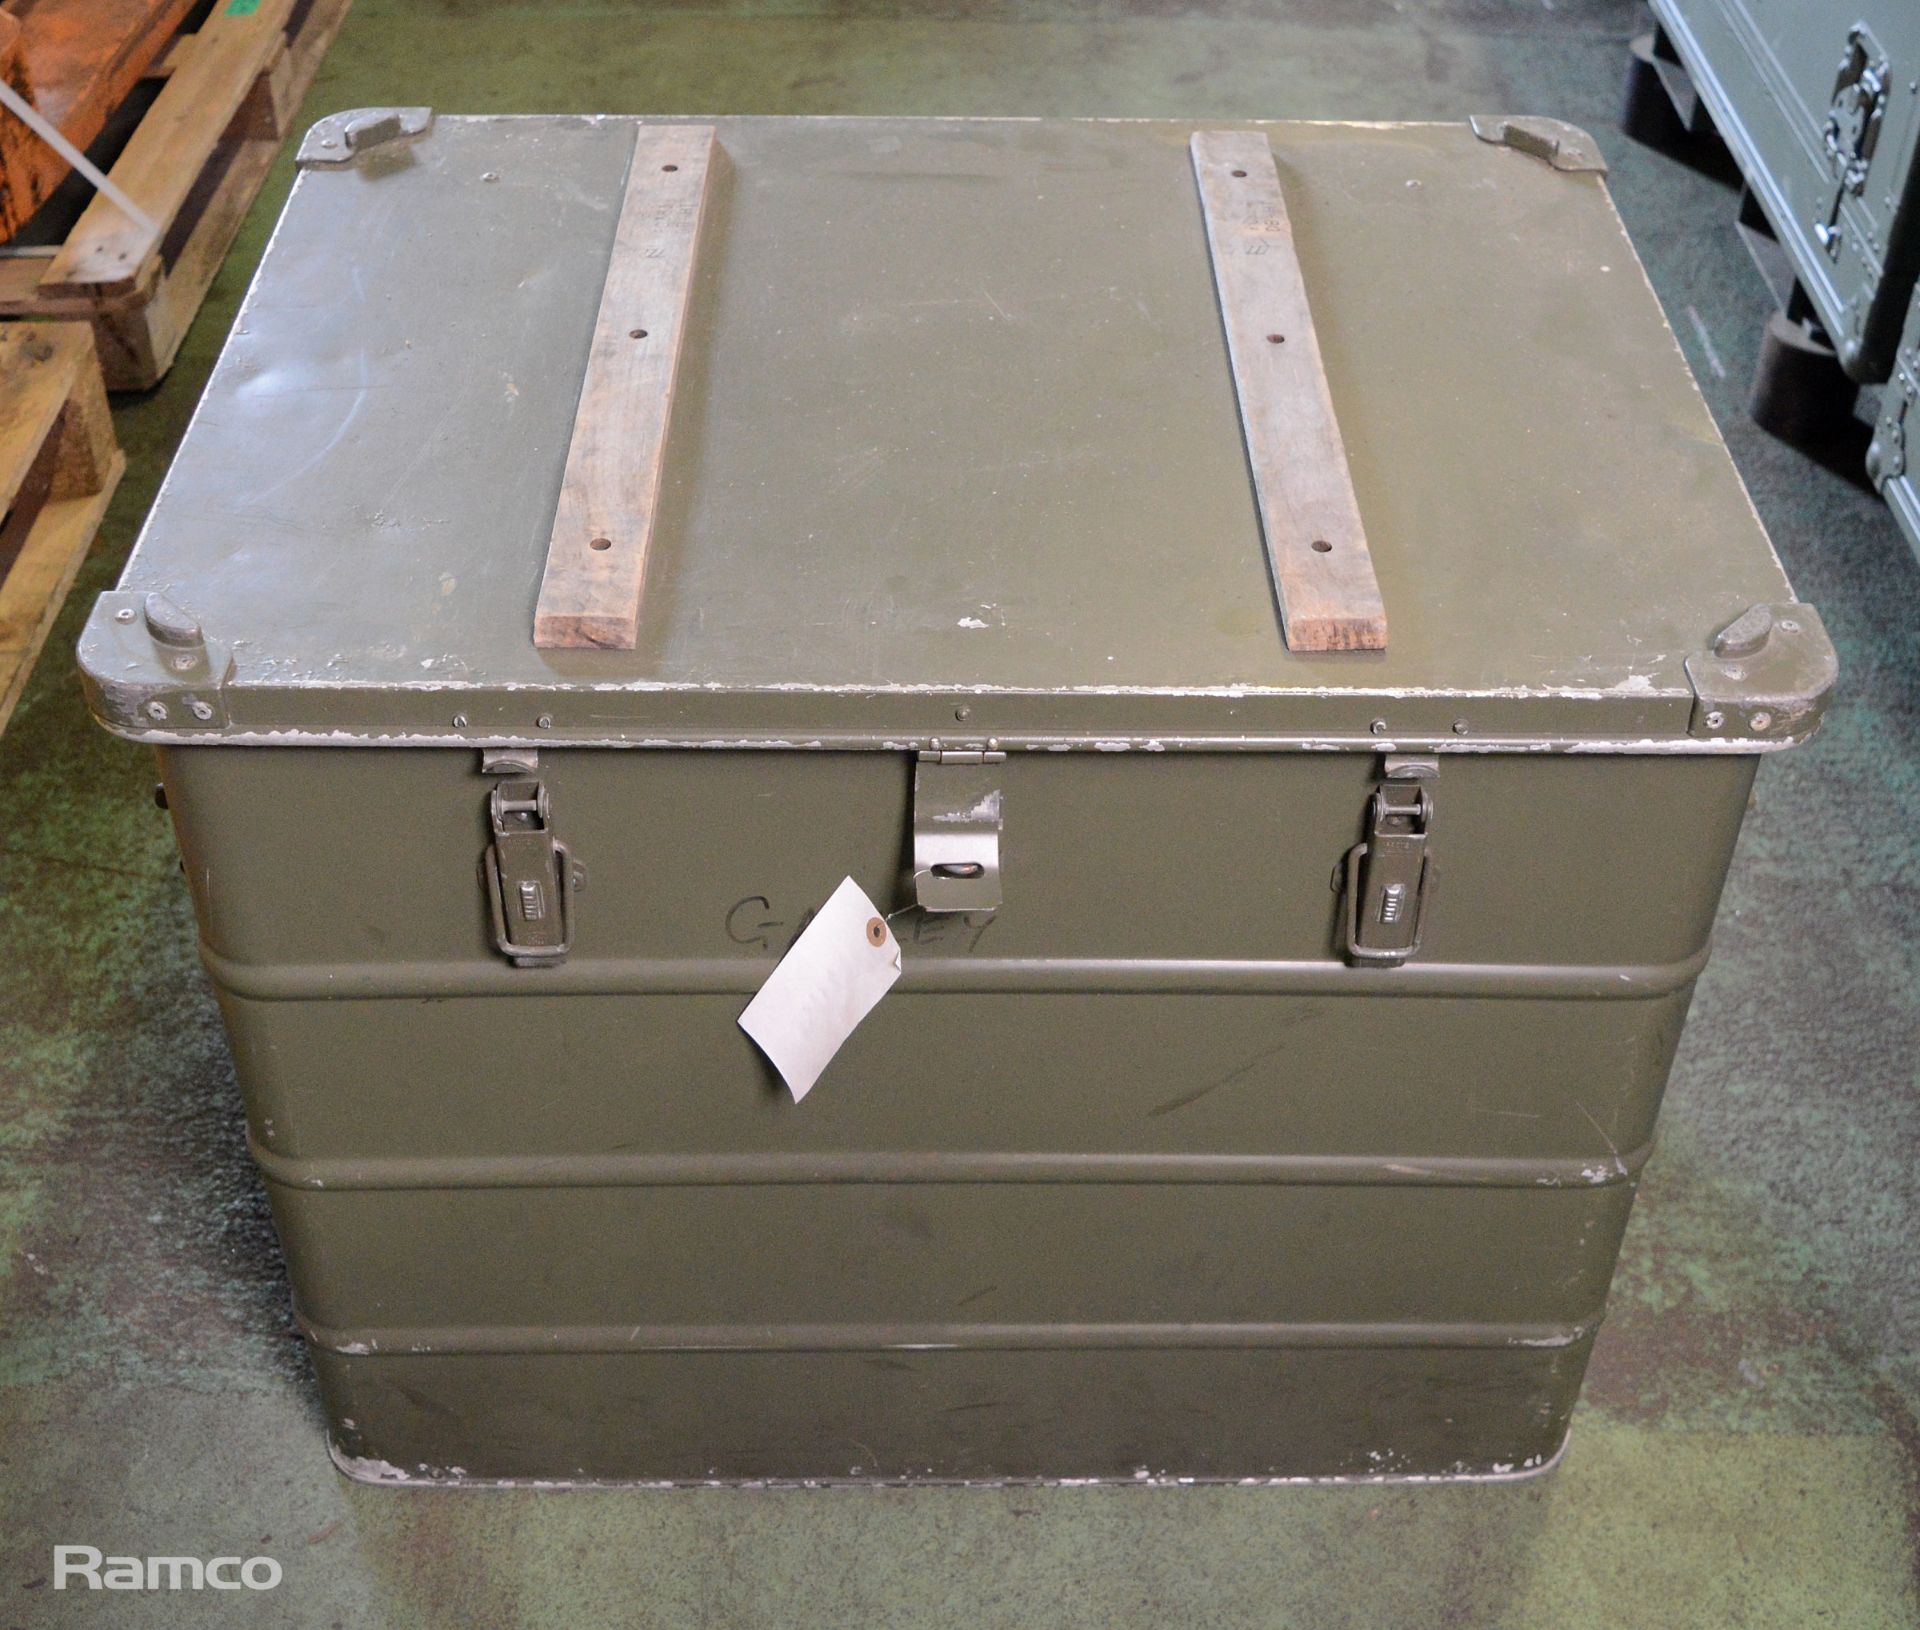 Protex aircraft storage container L80 x W59 x H62Cm - Image 4 of 4